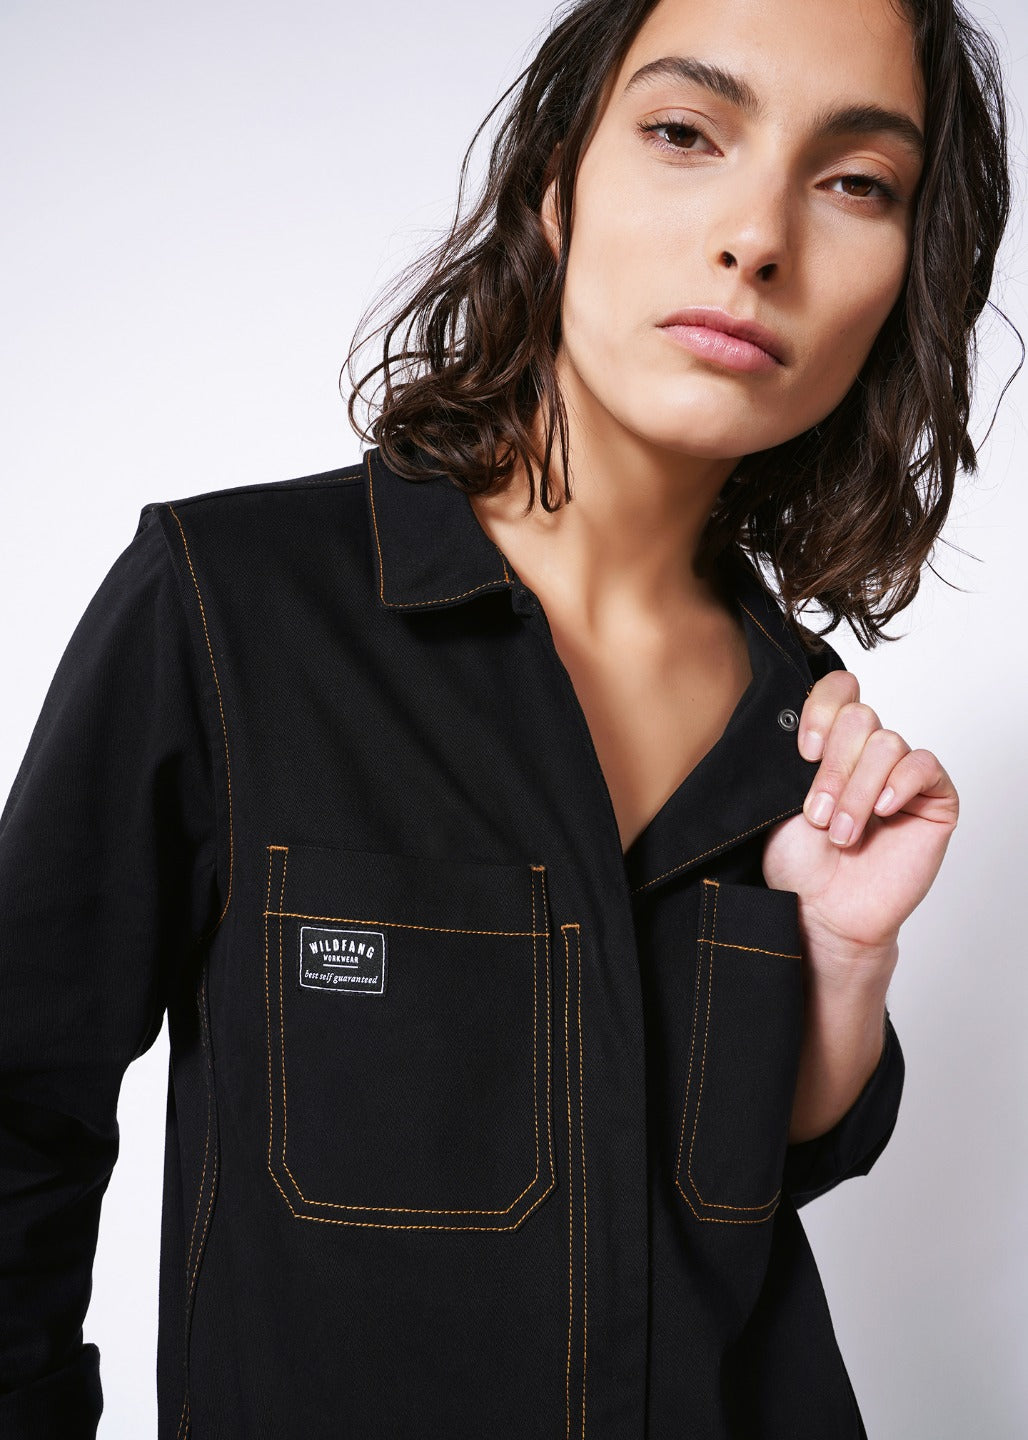 Model wearing black size small long sleeve coverall jumpsuit with orange pop-stitch detailing, pulling on collar and looking into camera